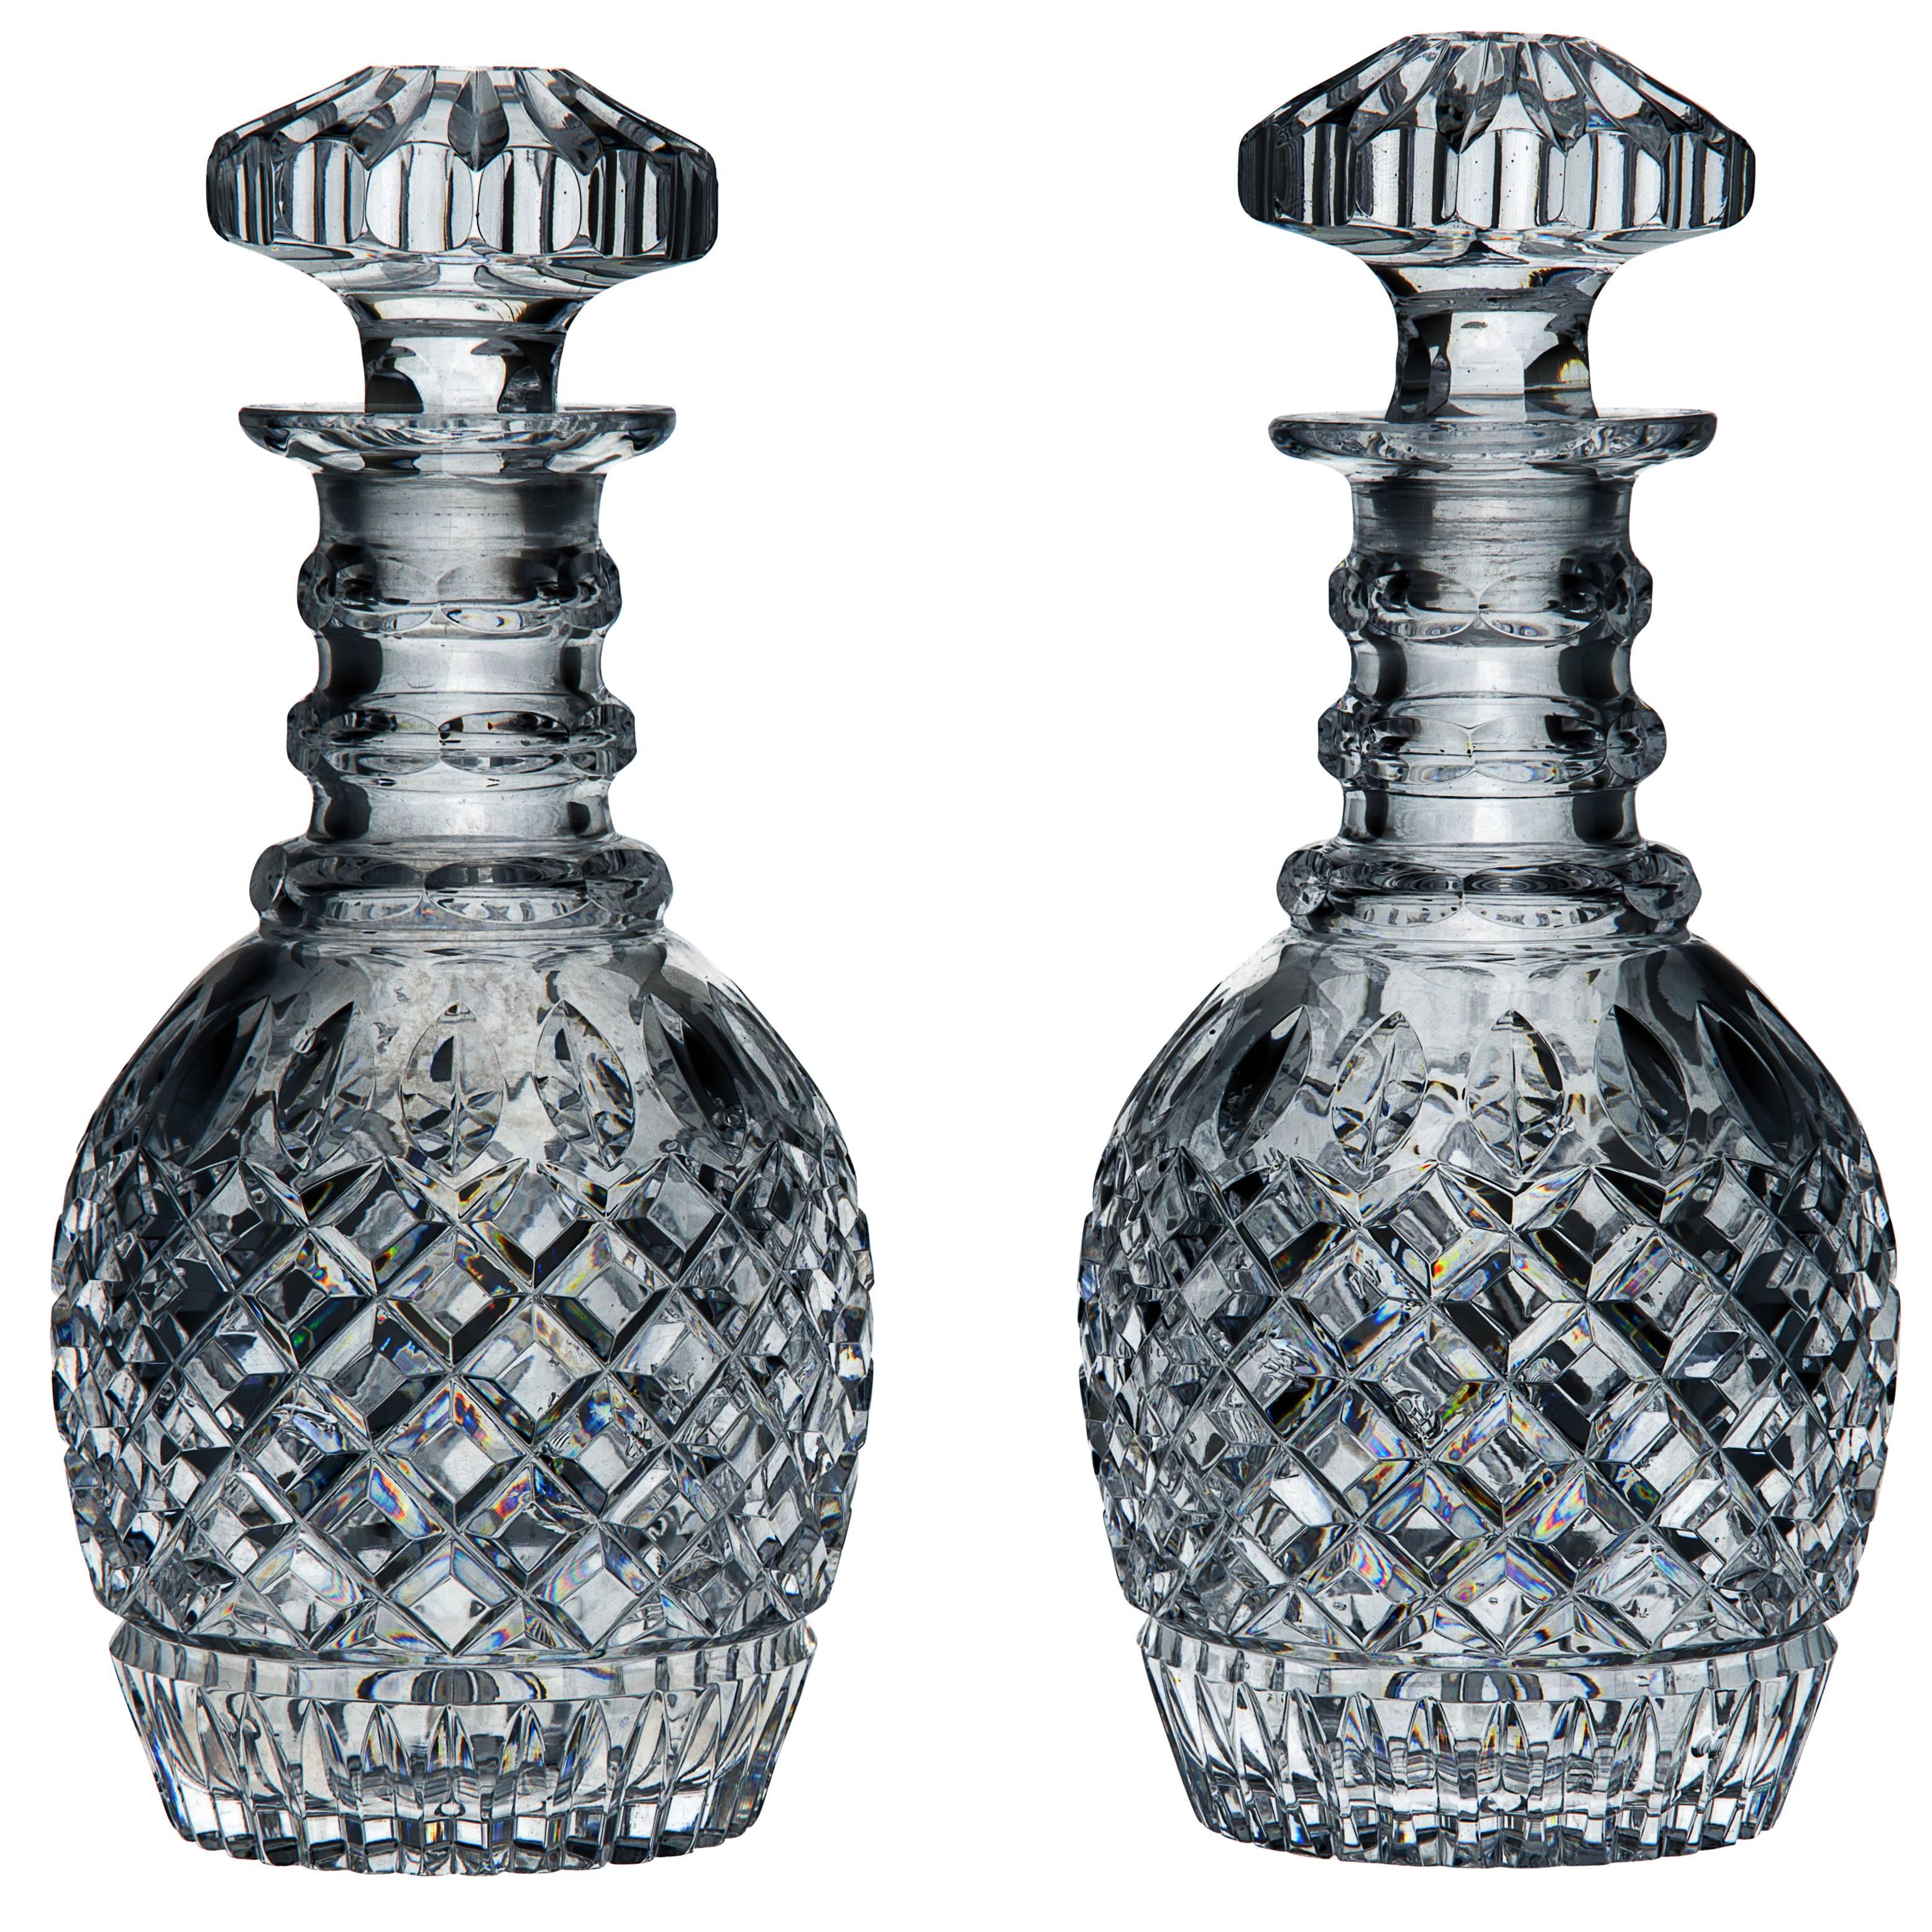 Pair of Victorian Glass Blown-Molded English Barrel-Shaped Spirit Decanters For Sale